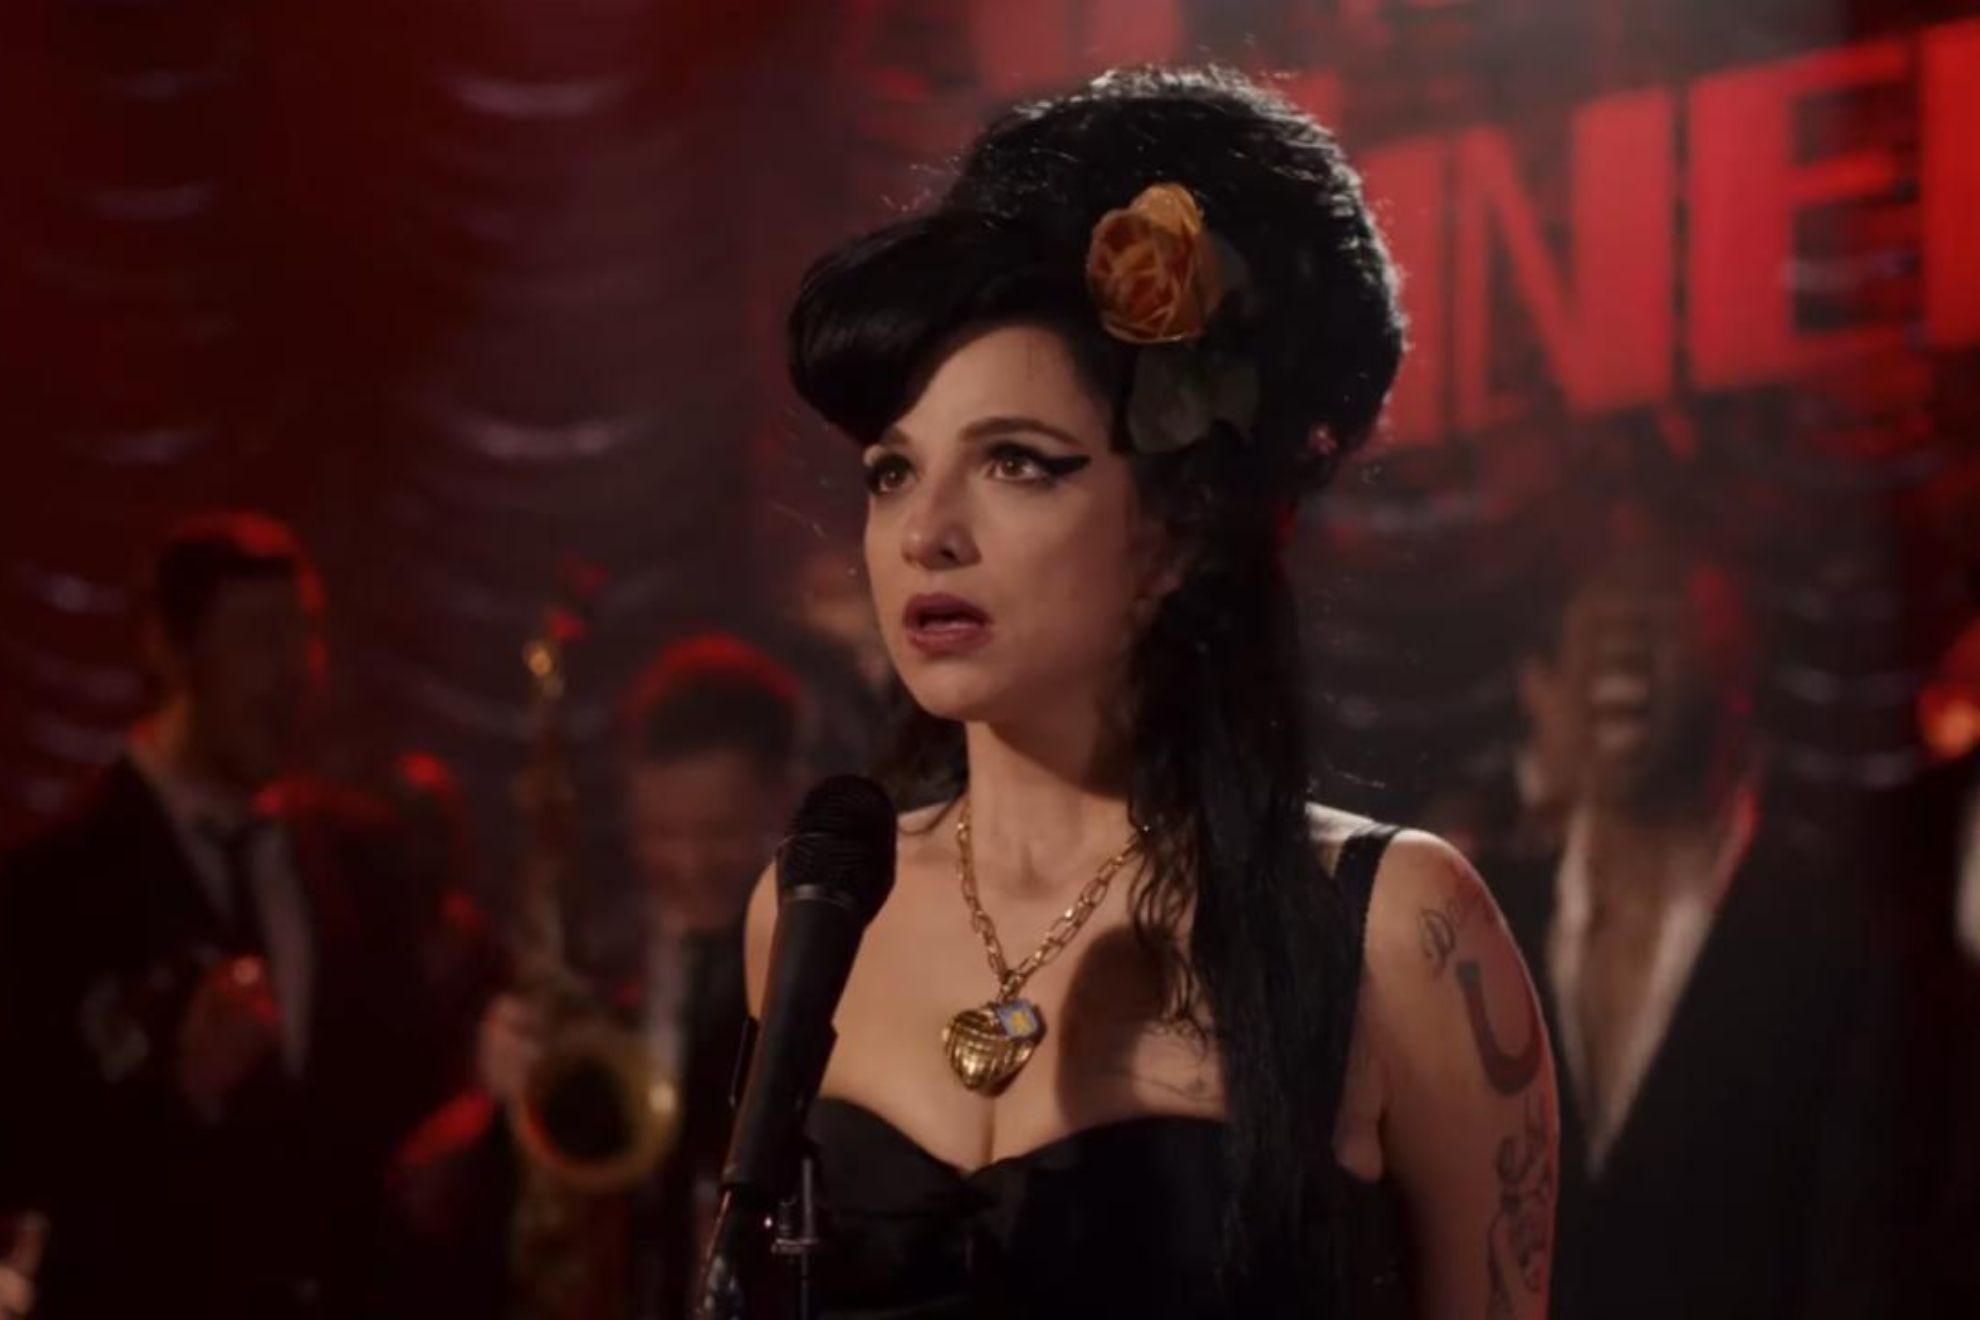 Amy Winehouse biopic Back to Black gets its first trailer release